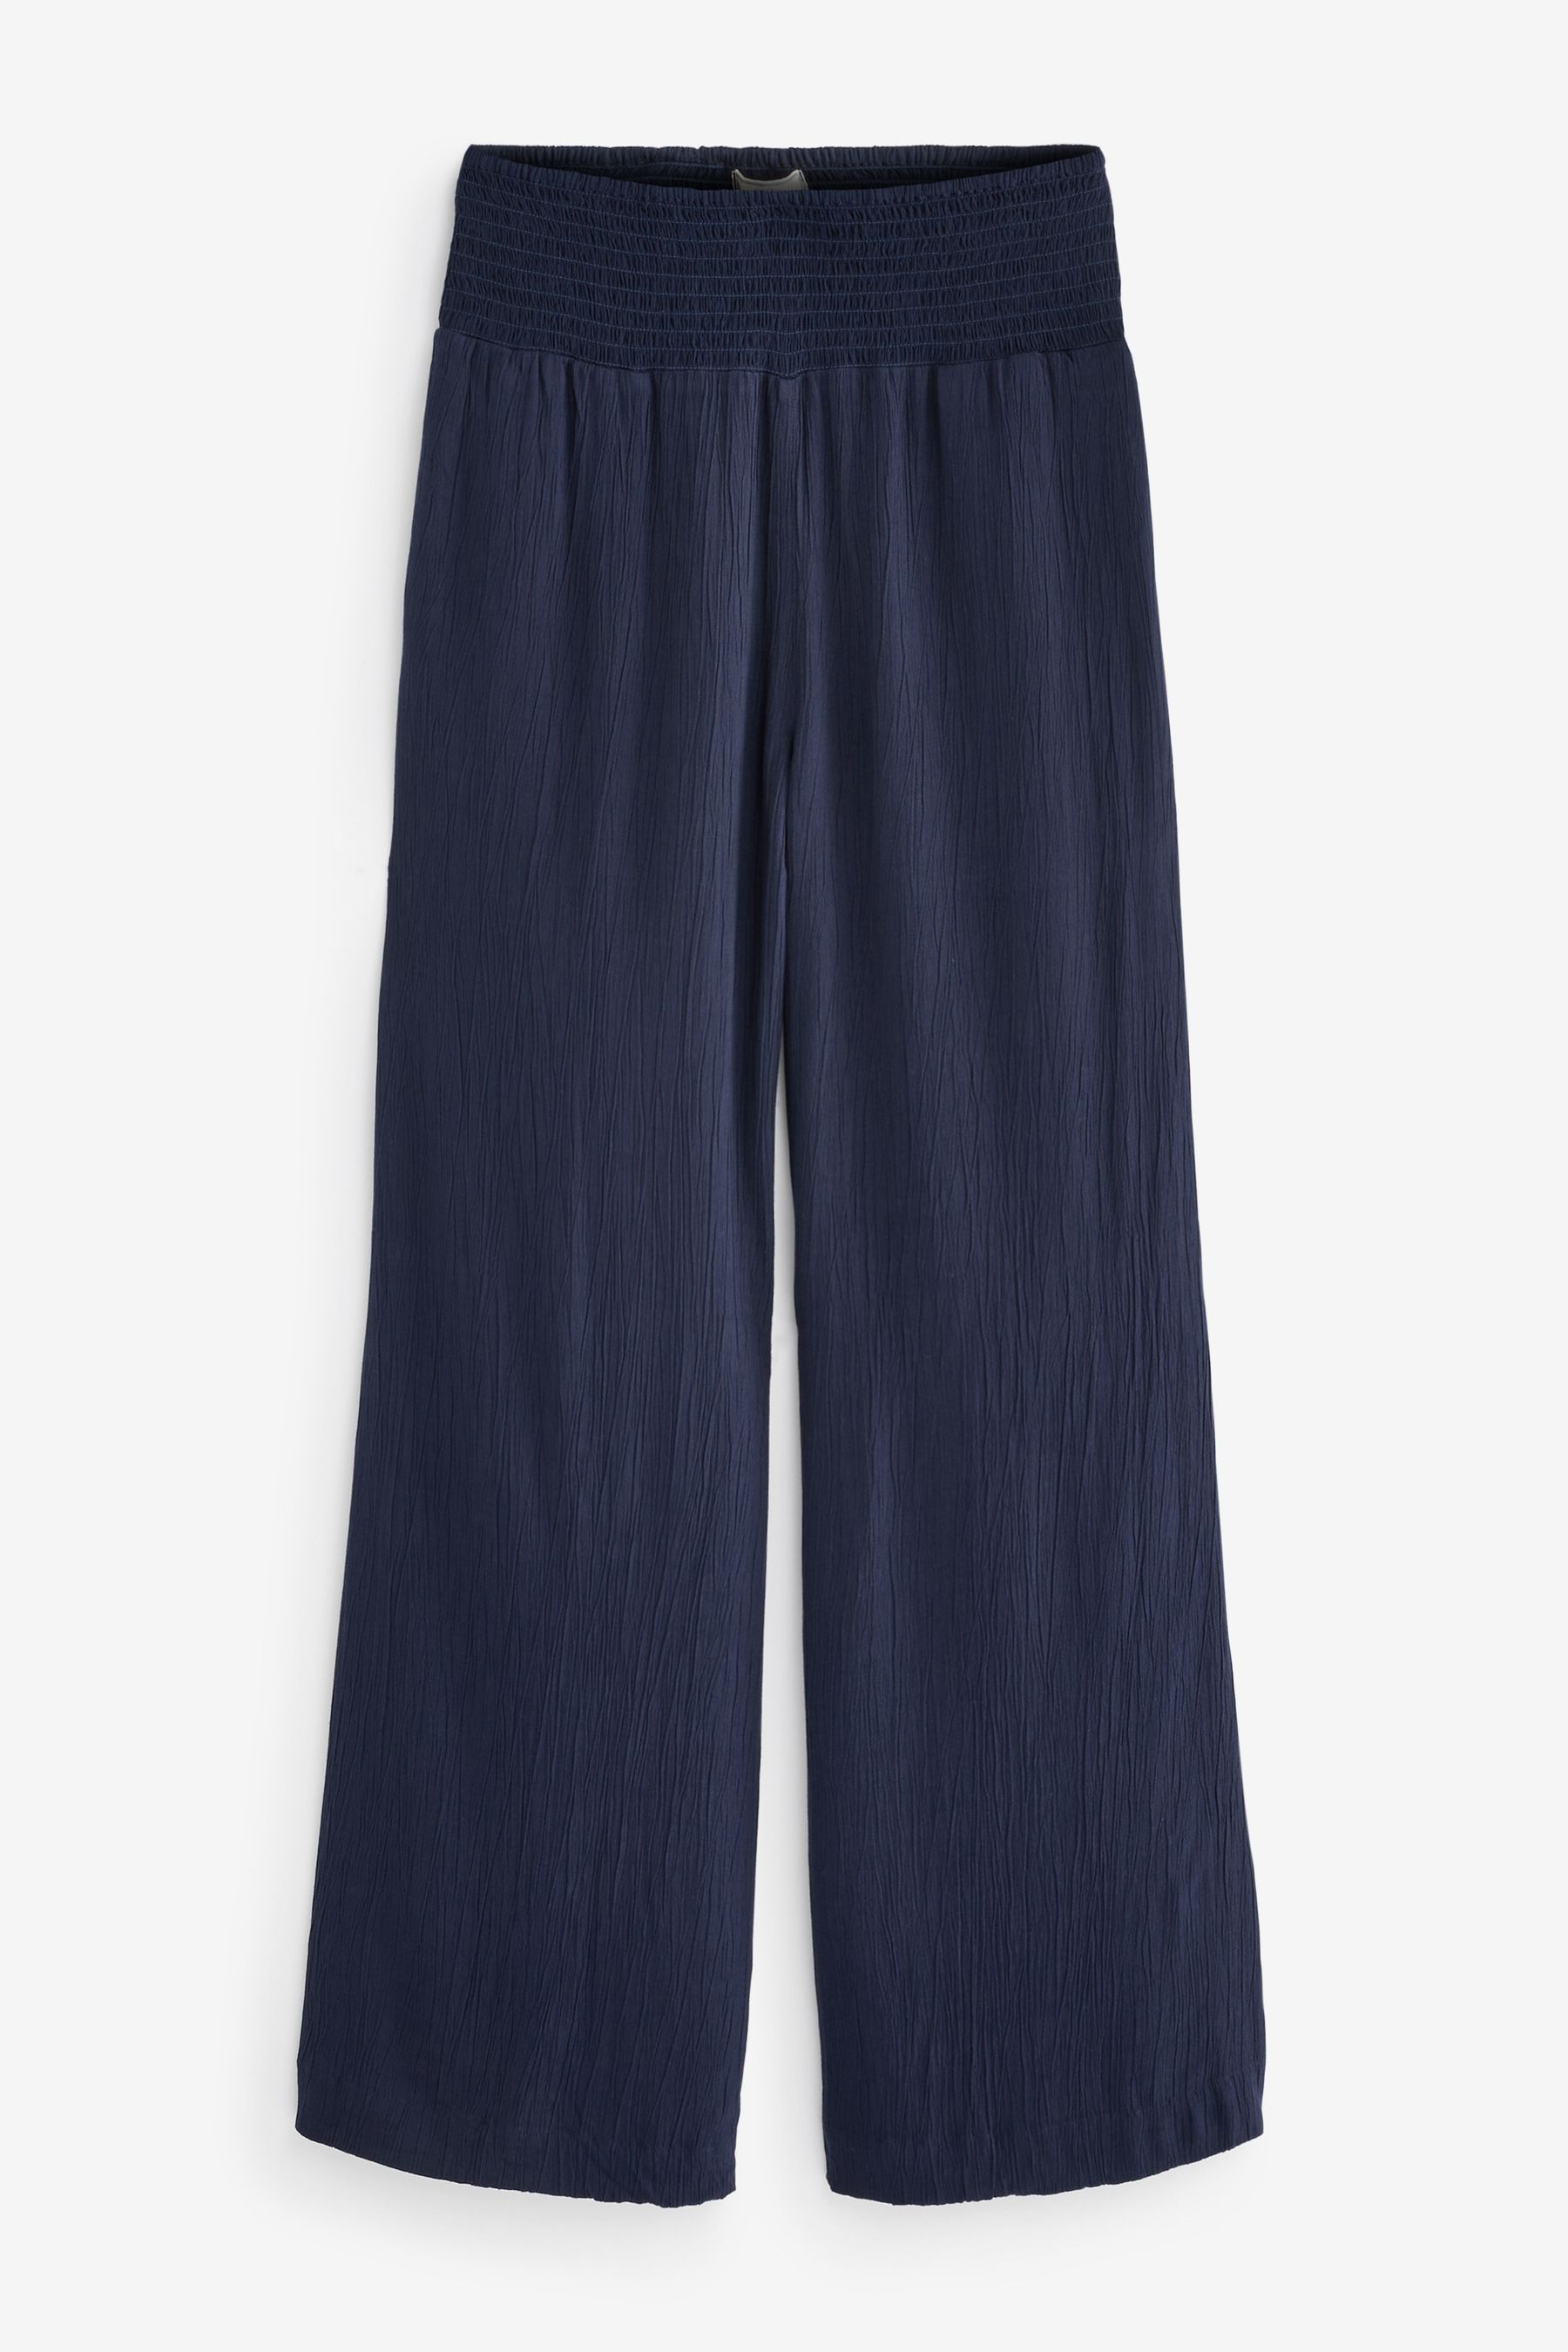 Buy FatFace Blue Shirred Plain Palazzo Trousers from the Next UK online ...